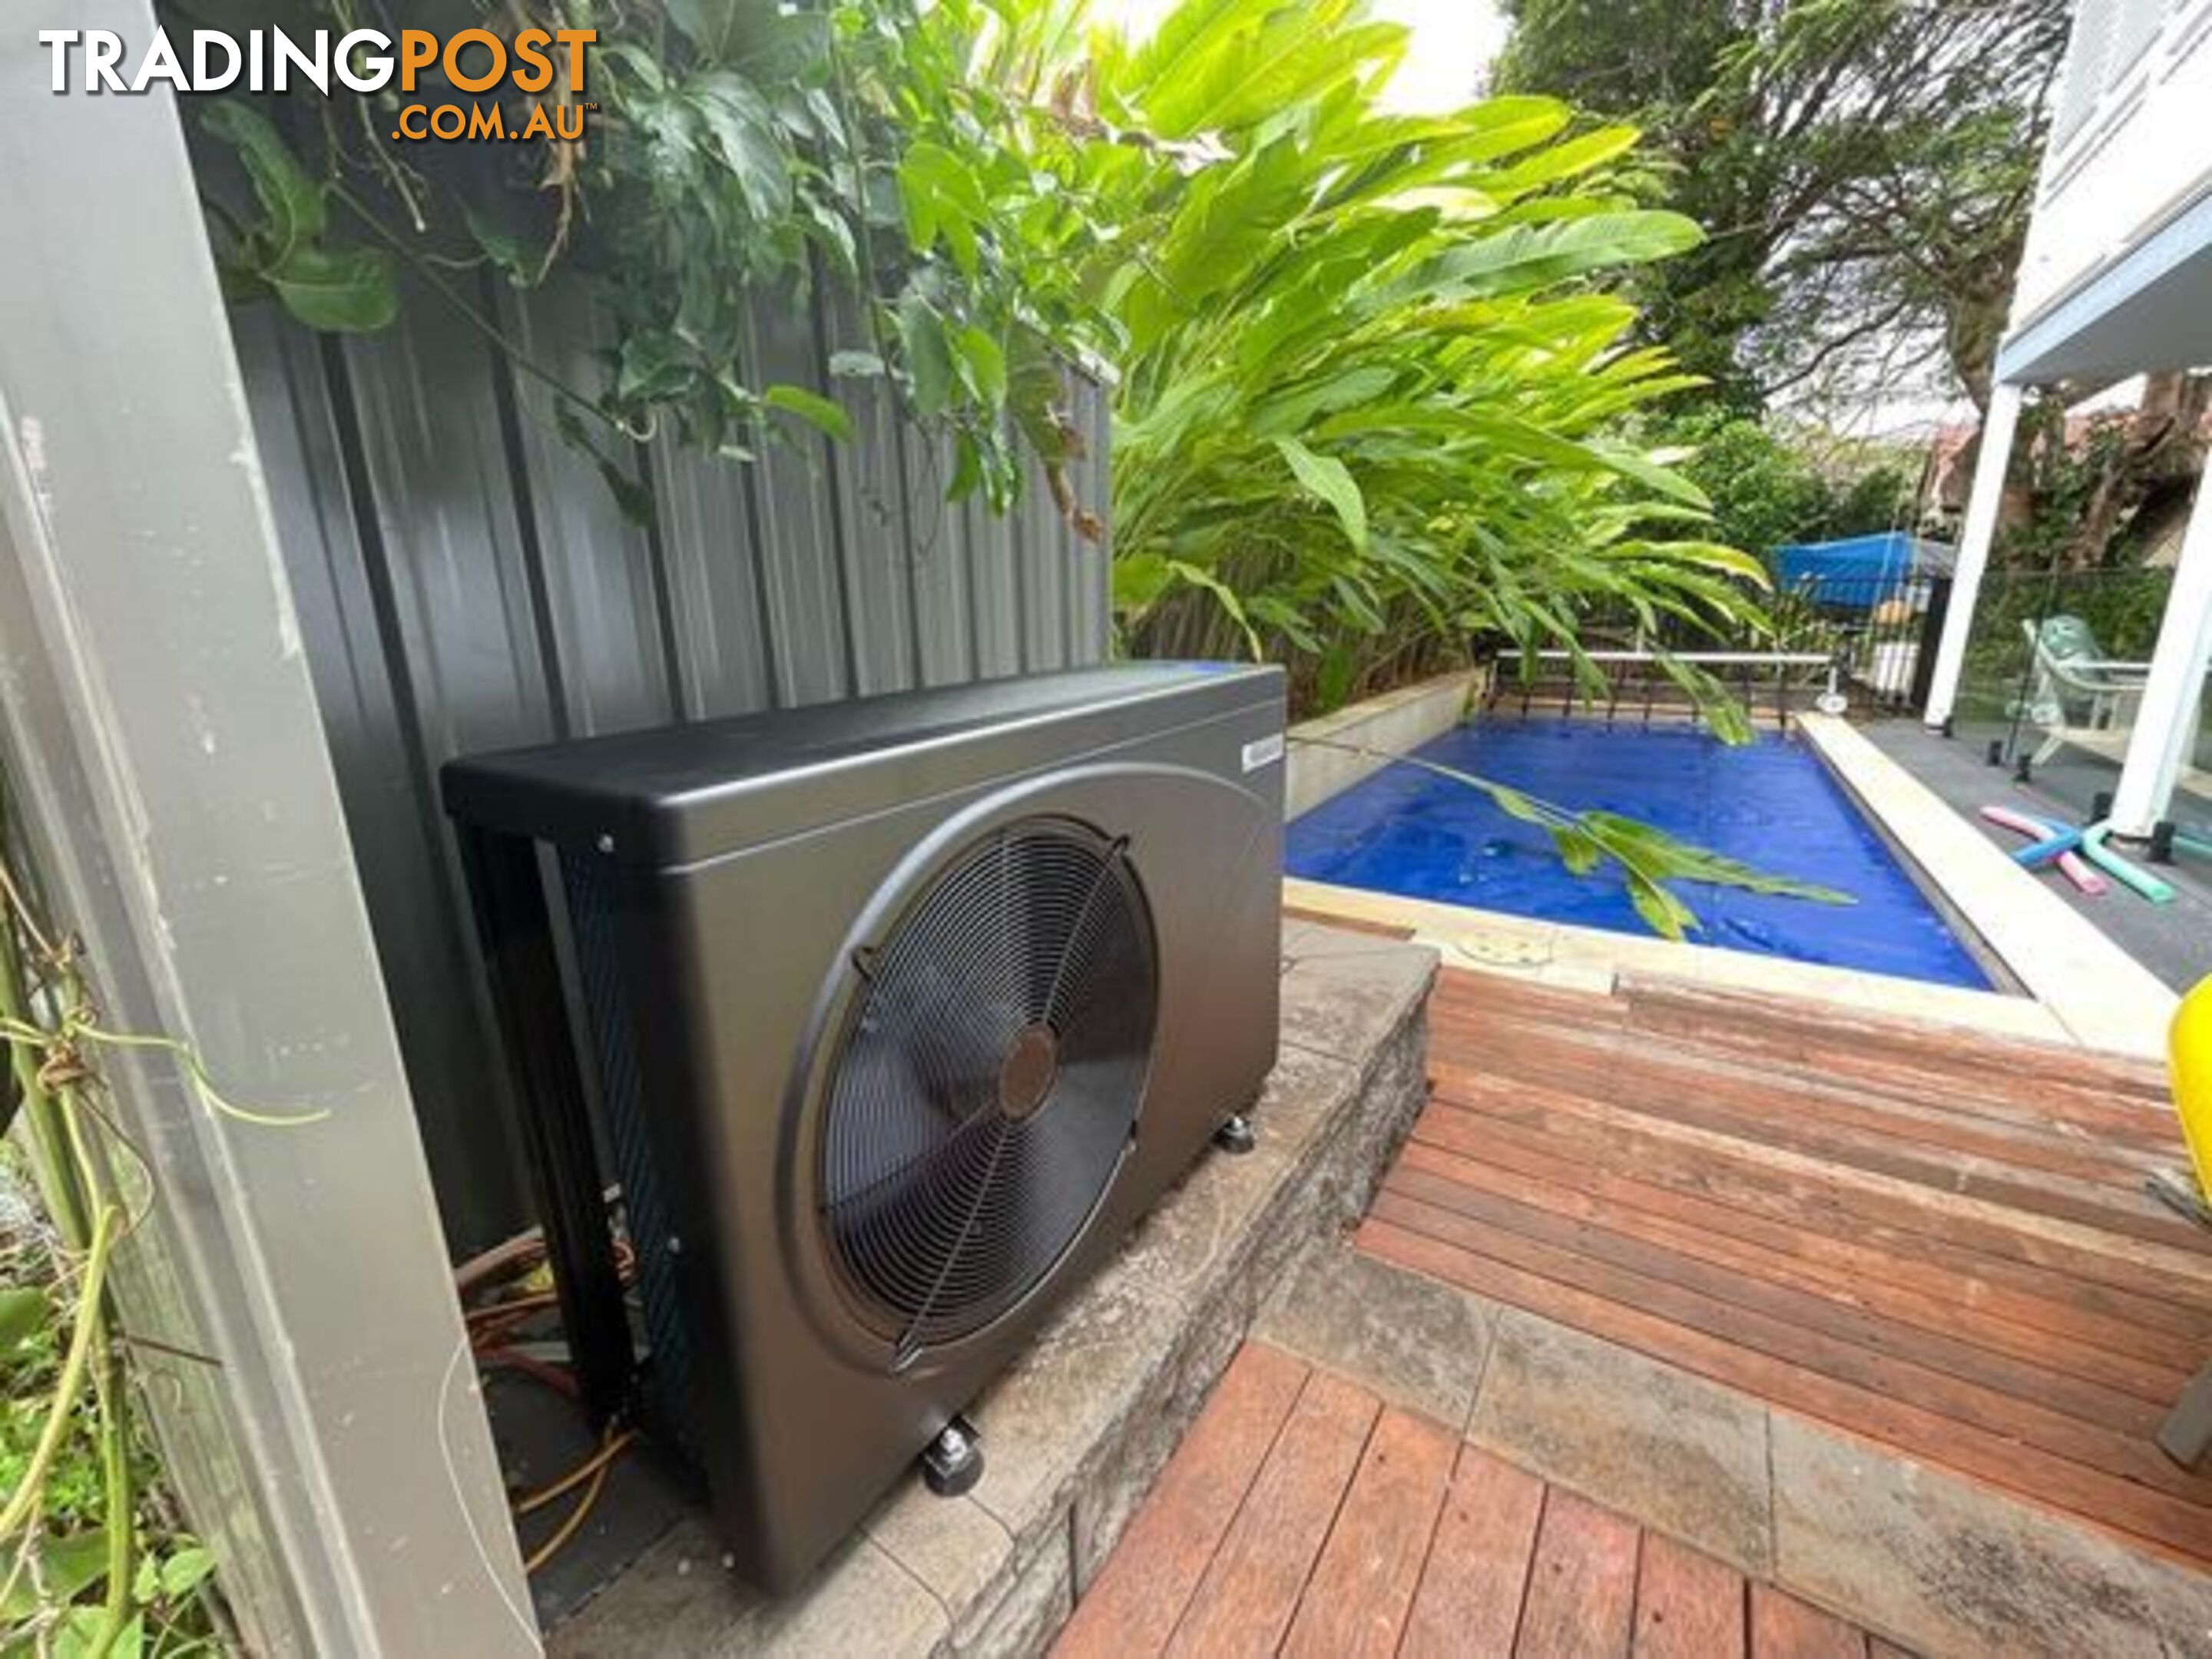 Last Chance to get 13 kw Vortex E Pool Heaters for $1999 usually $3950